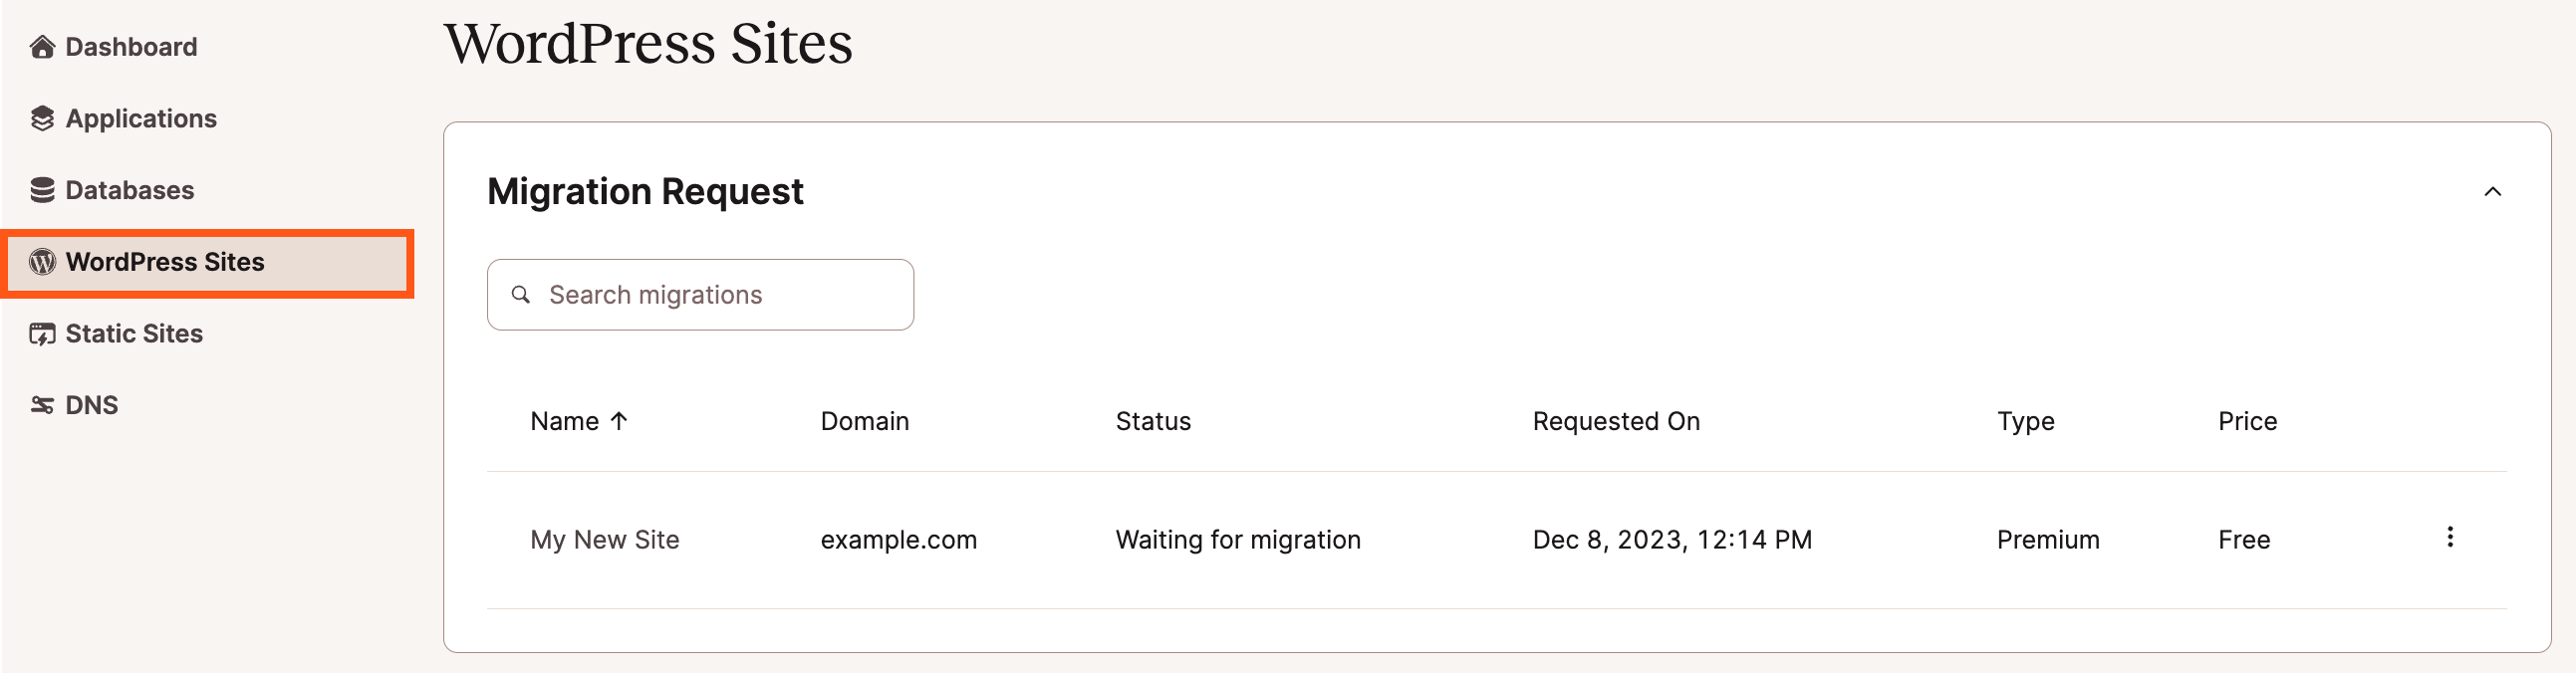 View migration requests on your WordPress Sites page in MyKinsta.